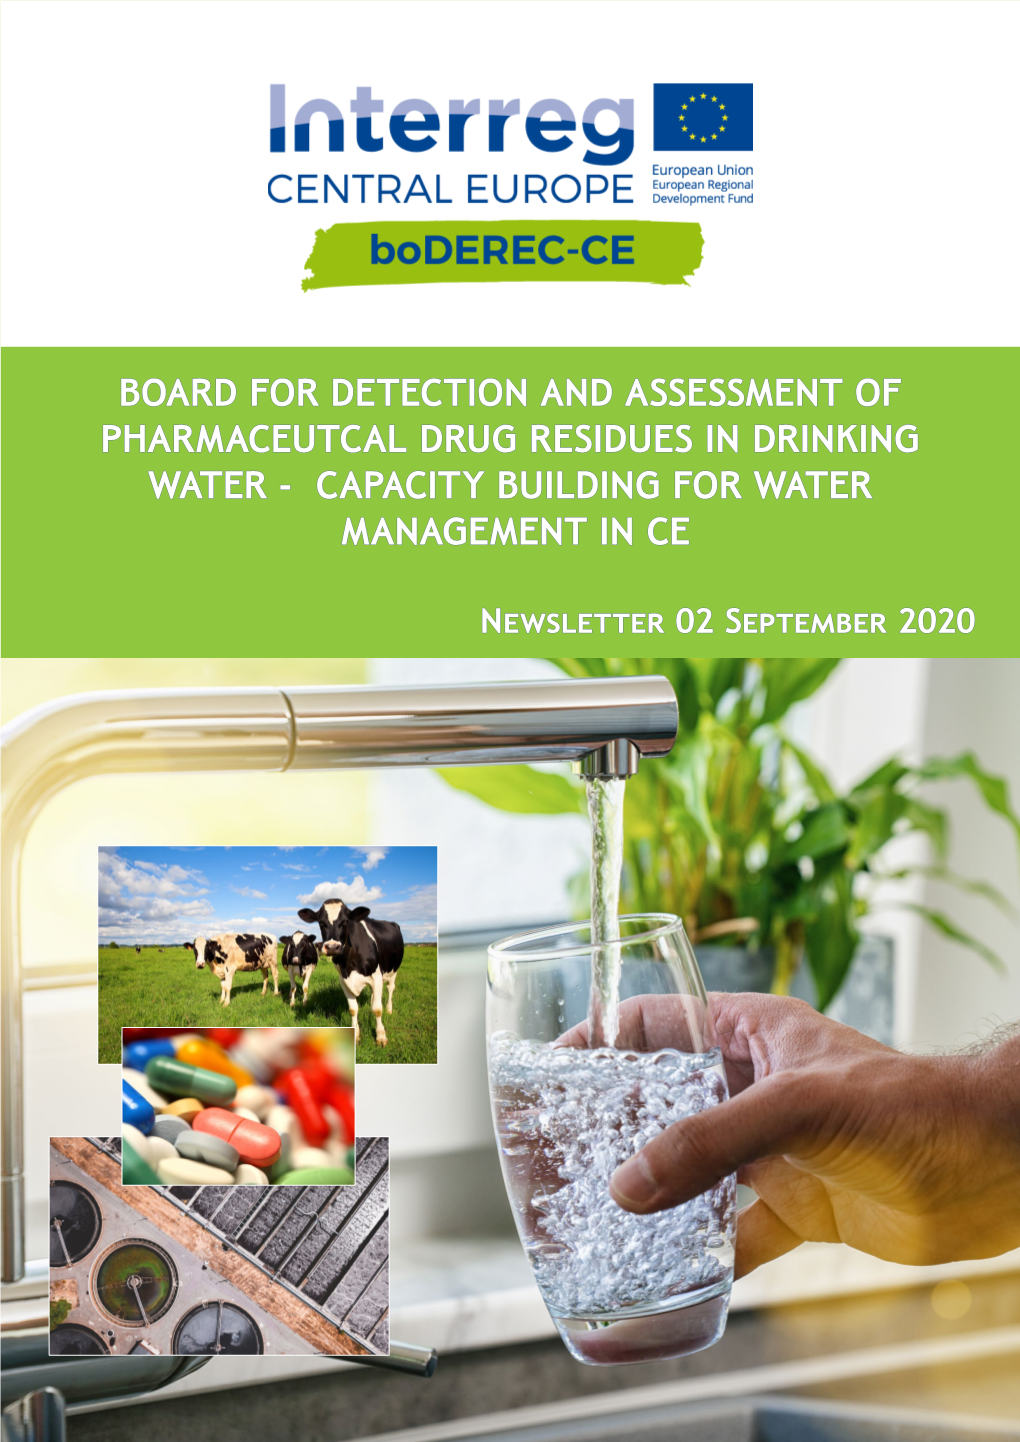 Board for Detection and Assessment of Pharmaceutcal Drug Residues in Drinking Water - Capacity Building for Water Management in Ce